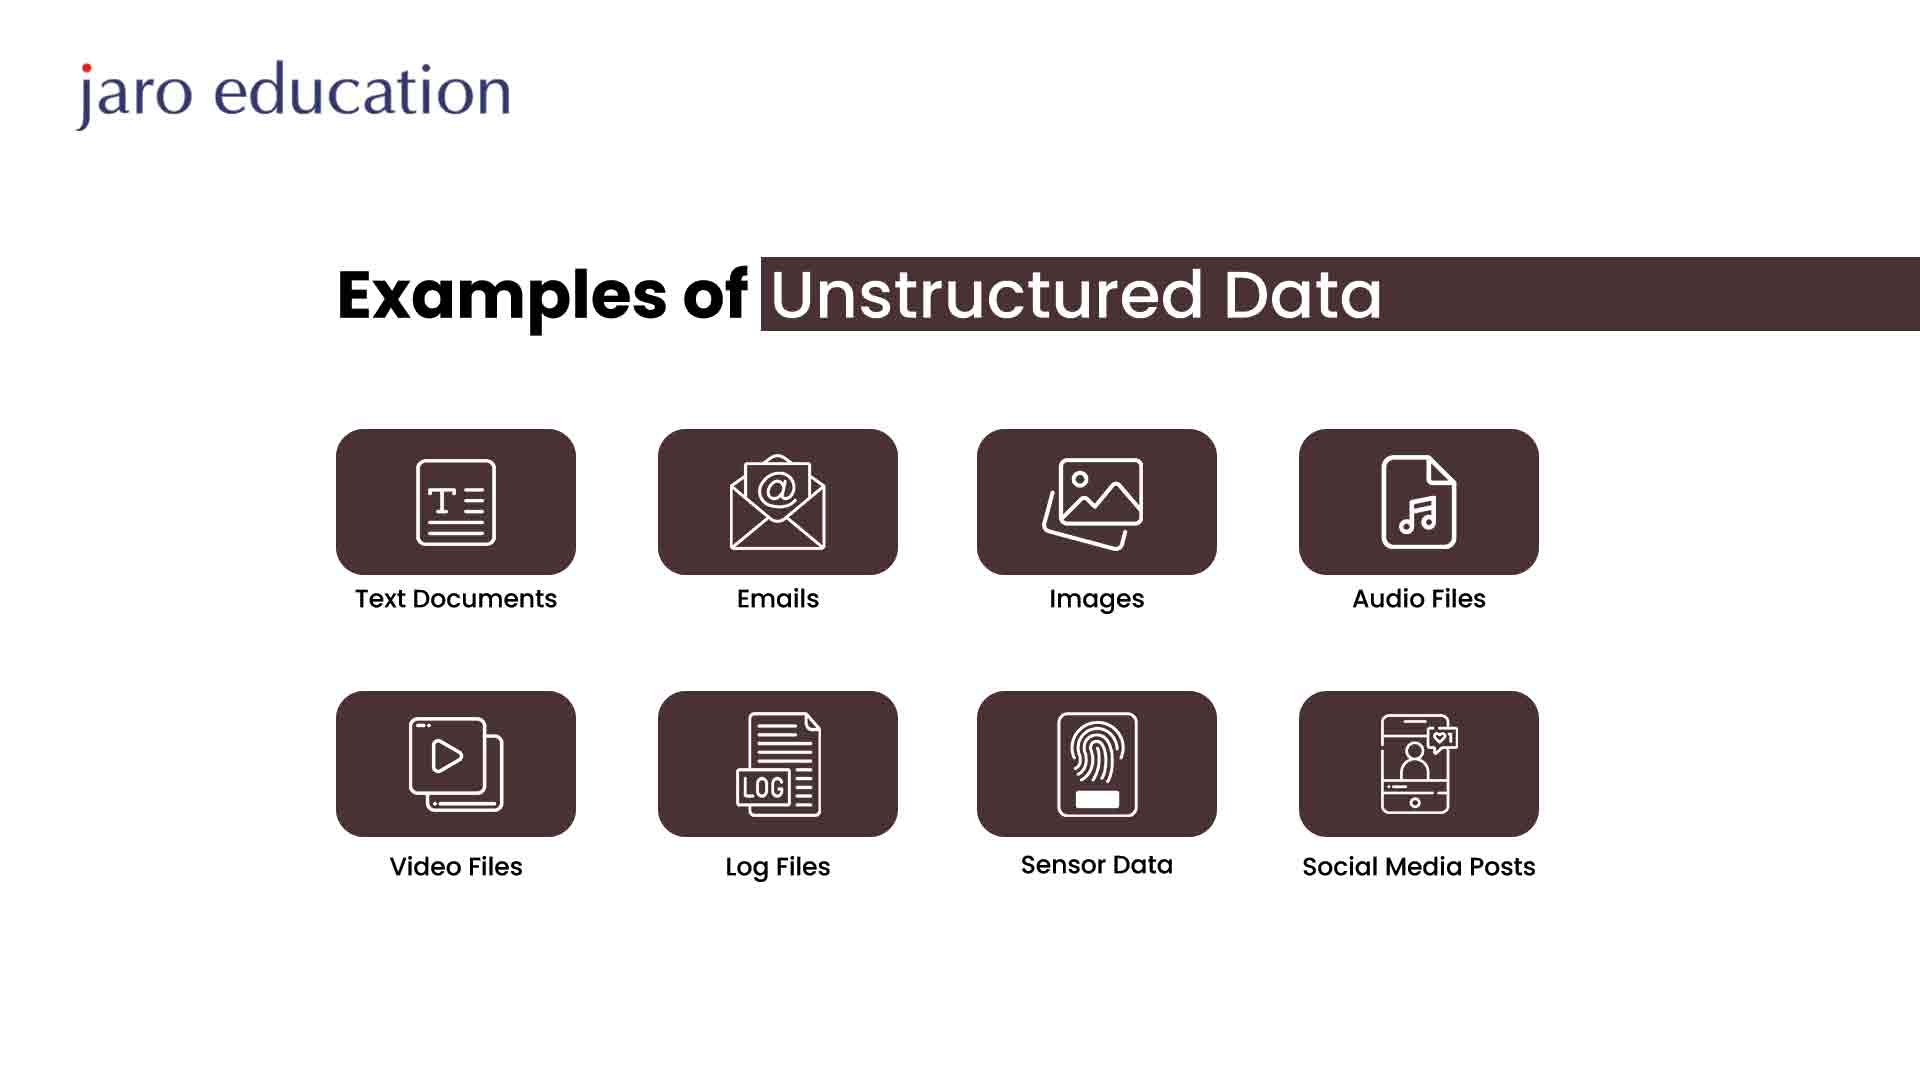 Examples of Unstructured Data